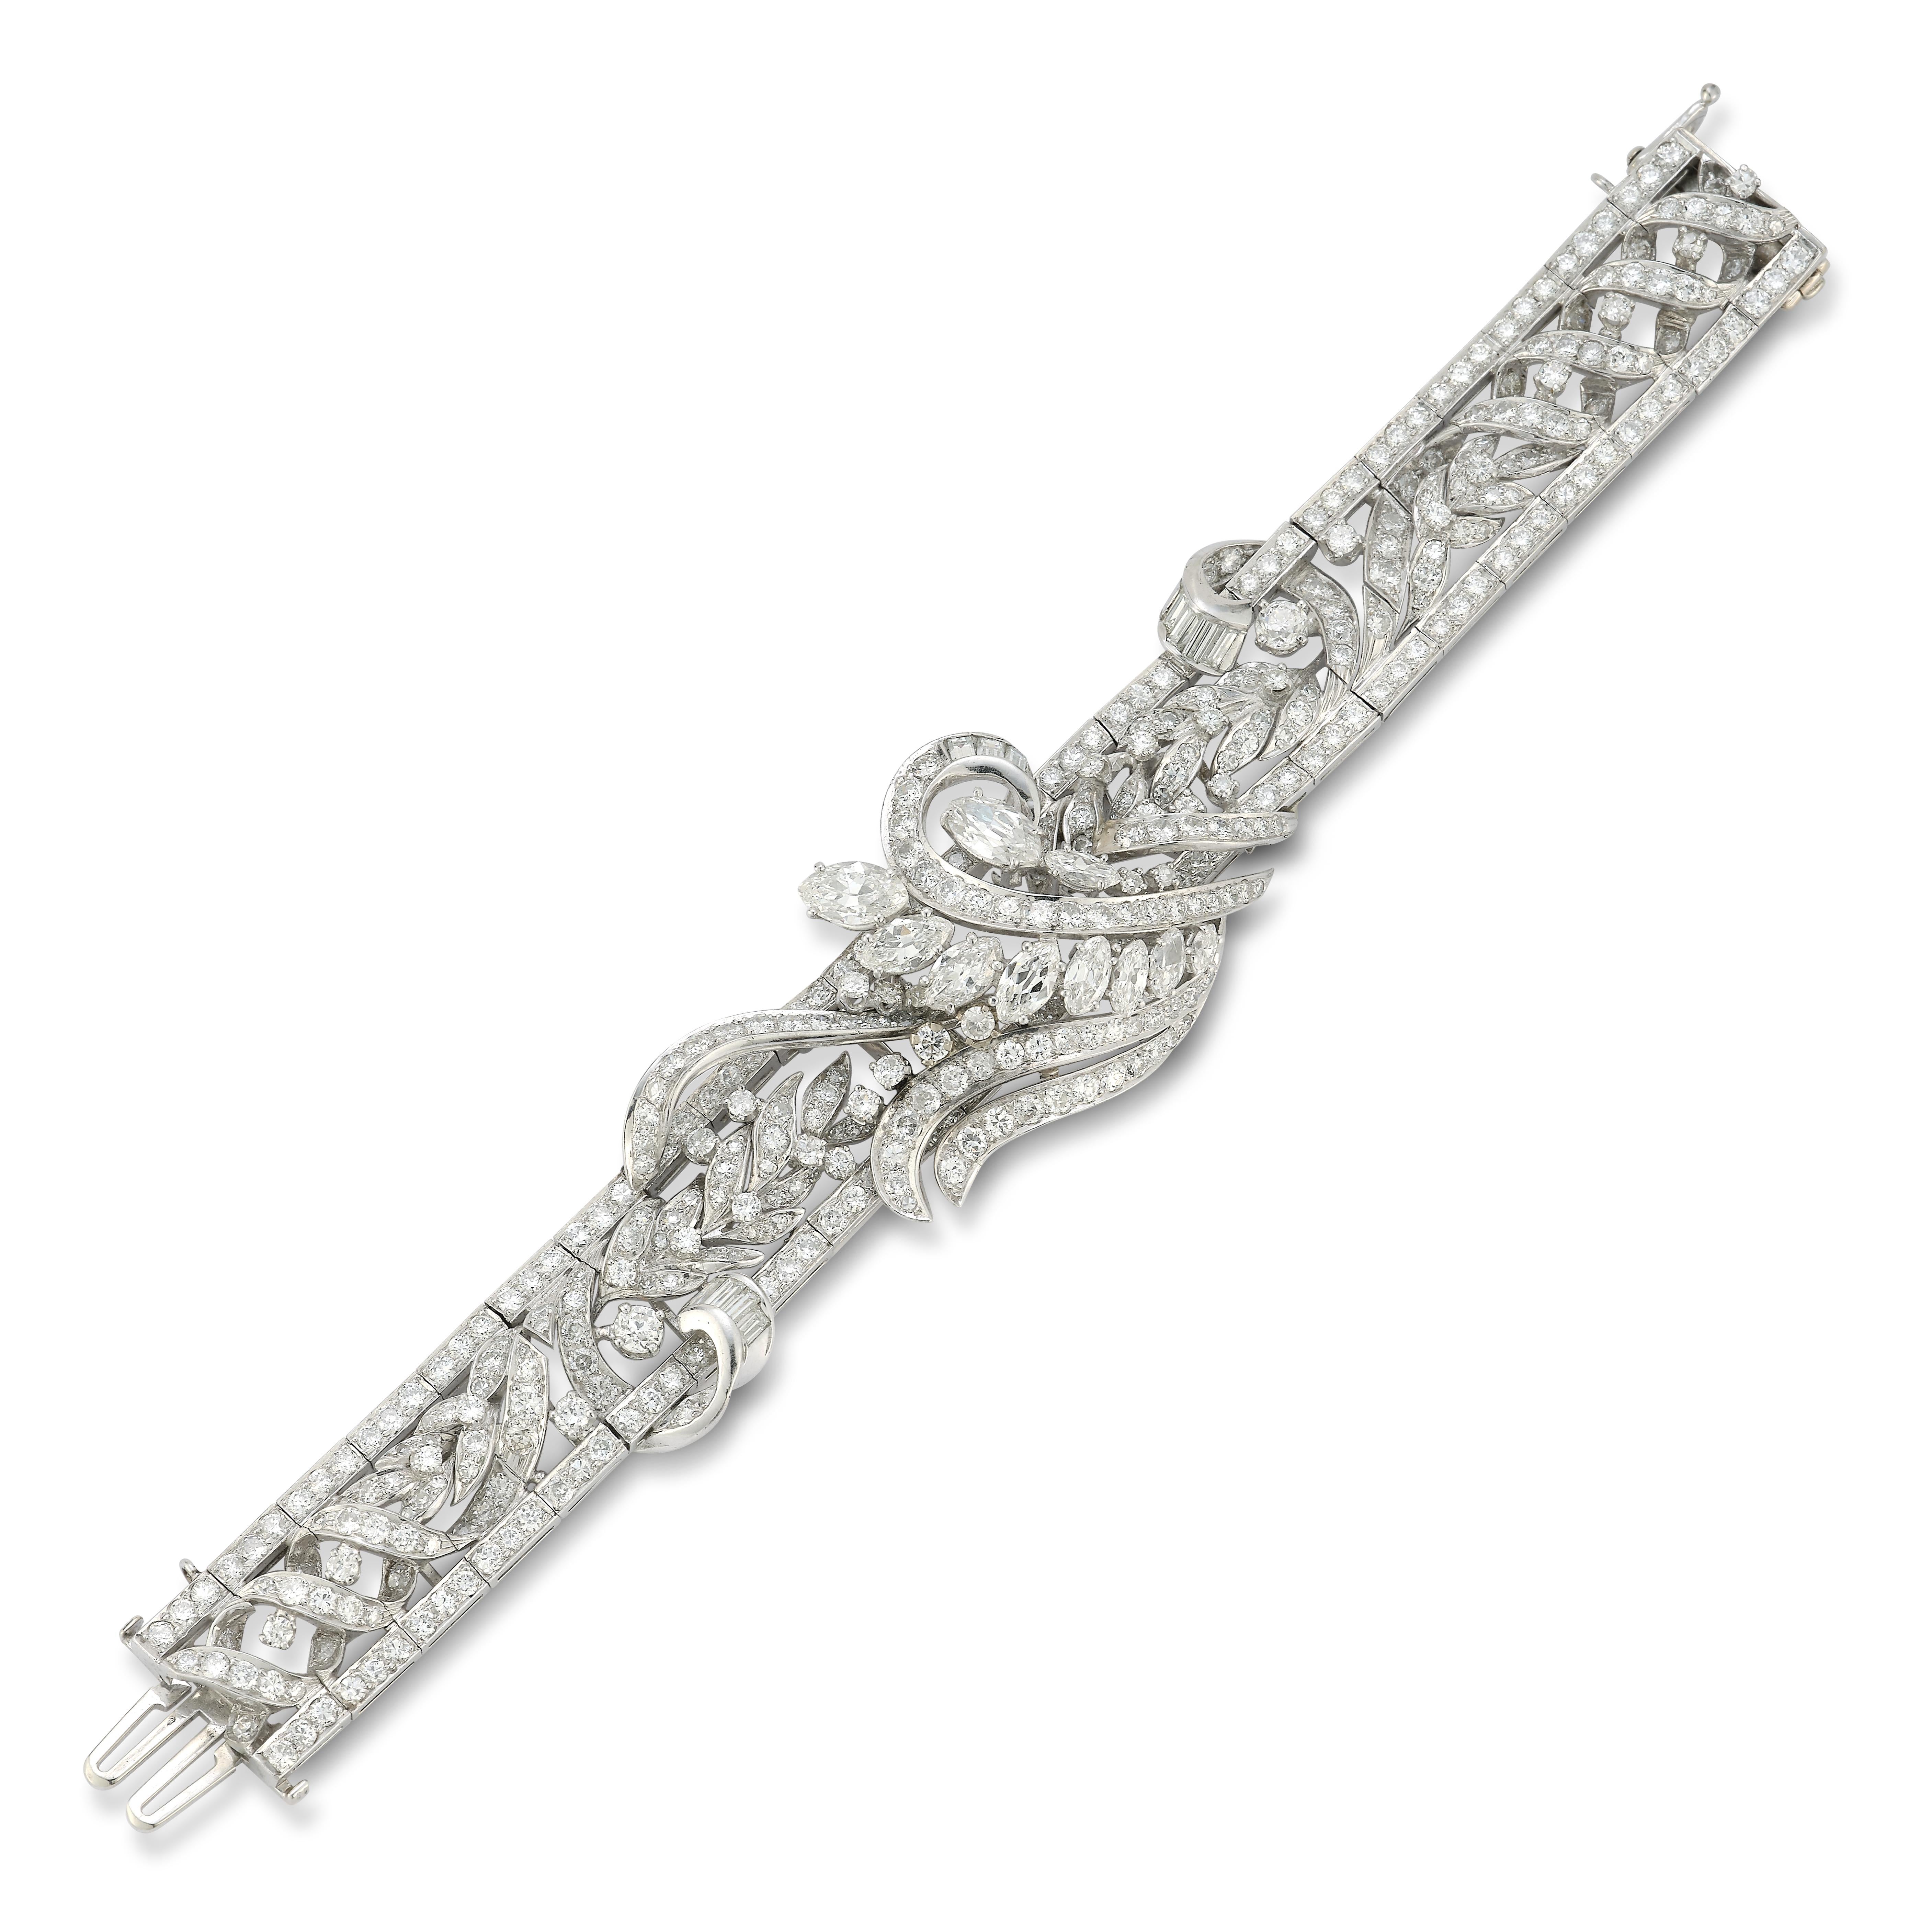 Diamond Bracelet

Set with 10 marquise, 11 baguette and 393 round cut diamonds forming a flower motif set in platinum.

Approximate Diamond Weight: 15 carats

Measurements: 6.25